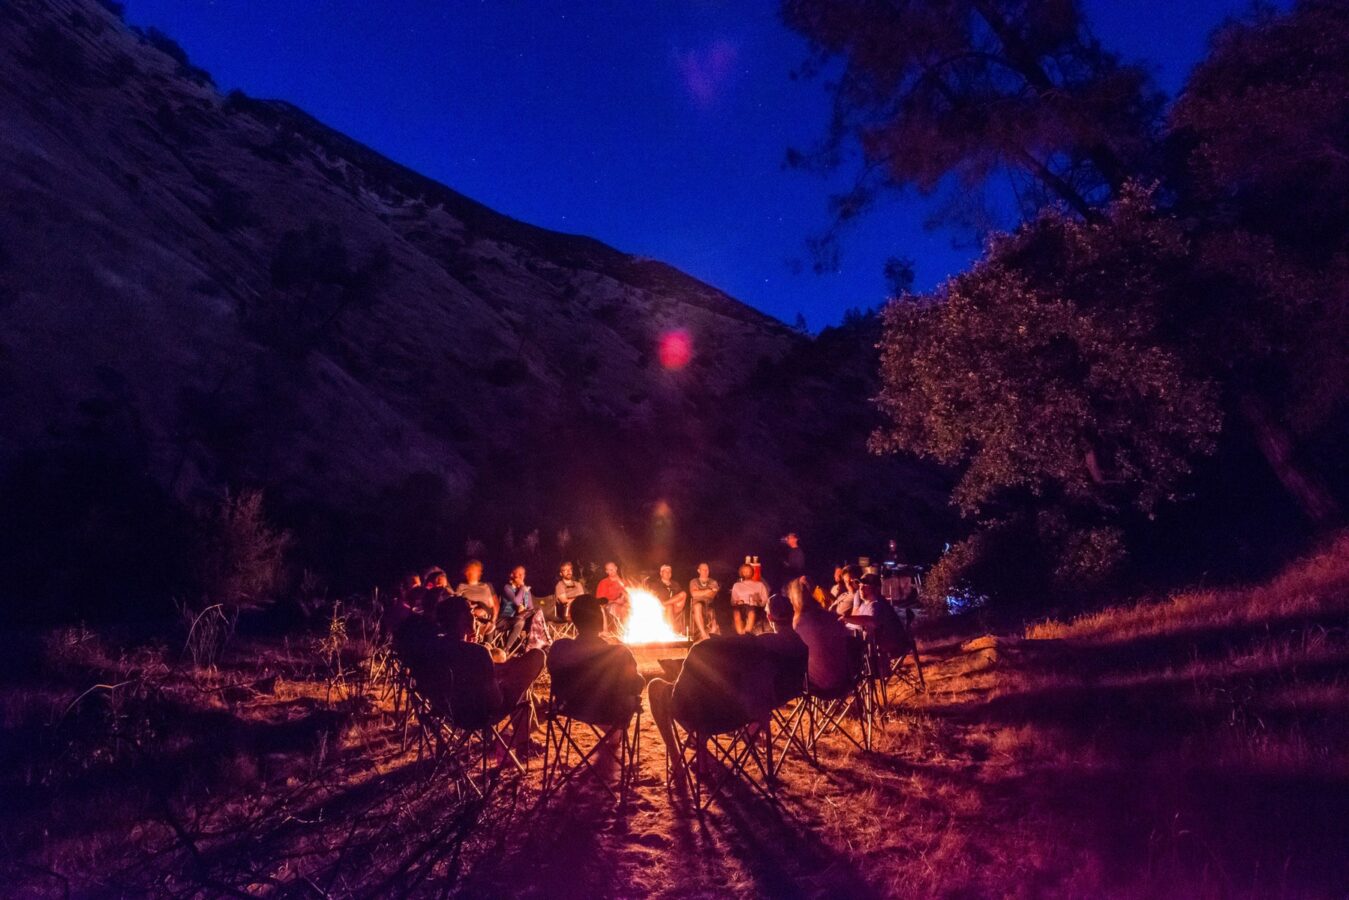 A group sits around a campfire in the chair circle at night on the Tuolumne River in California